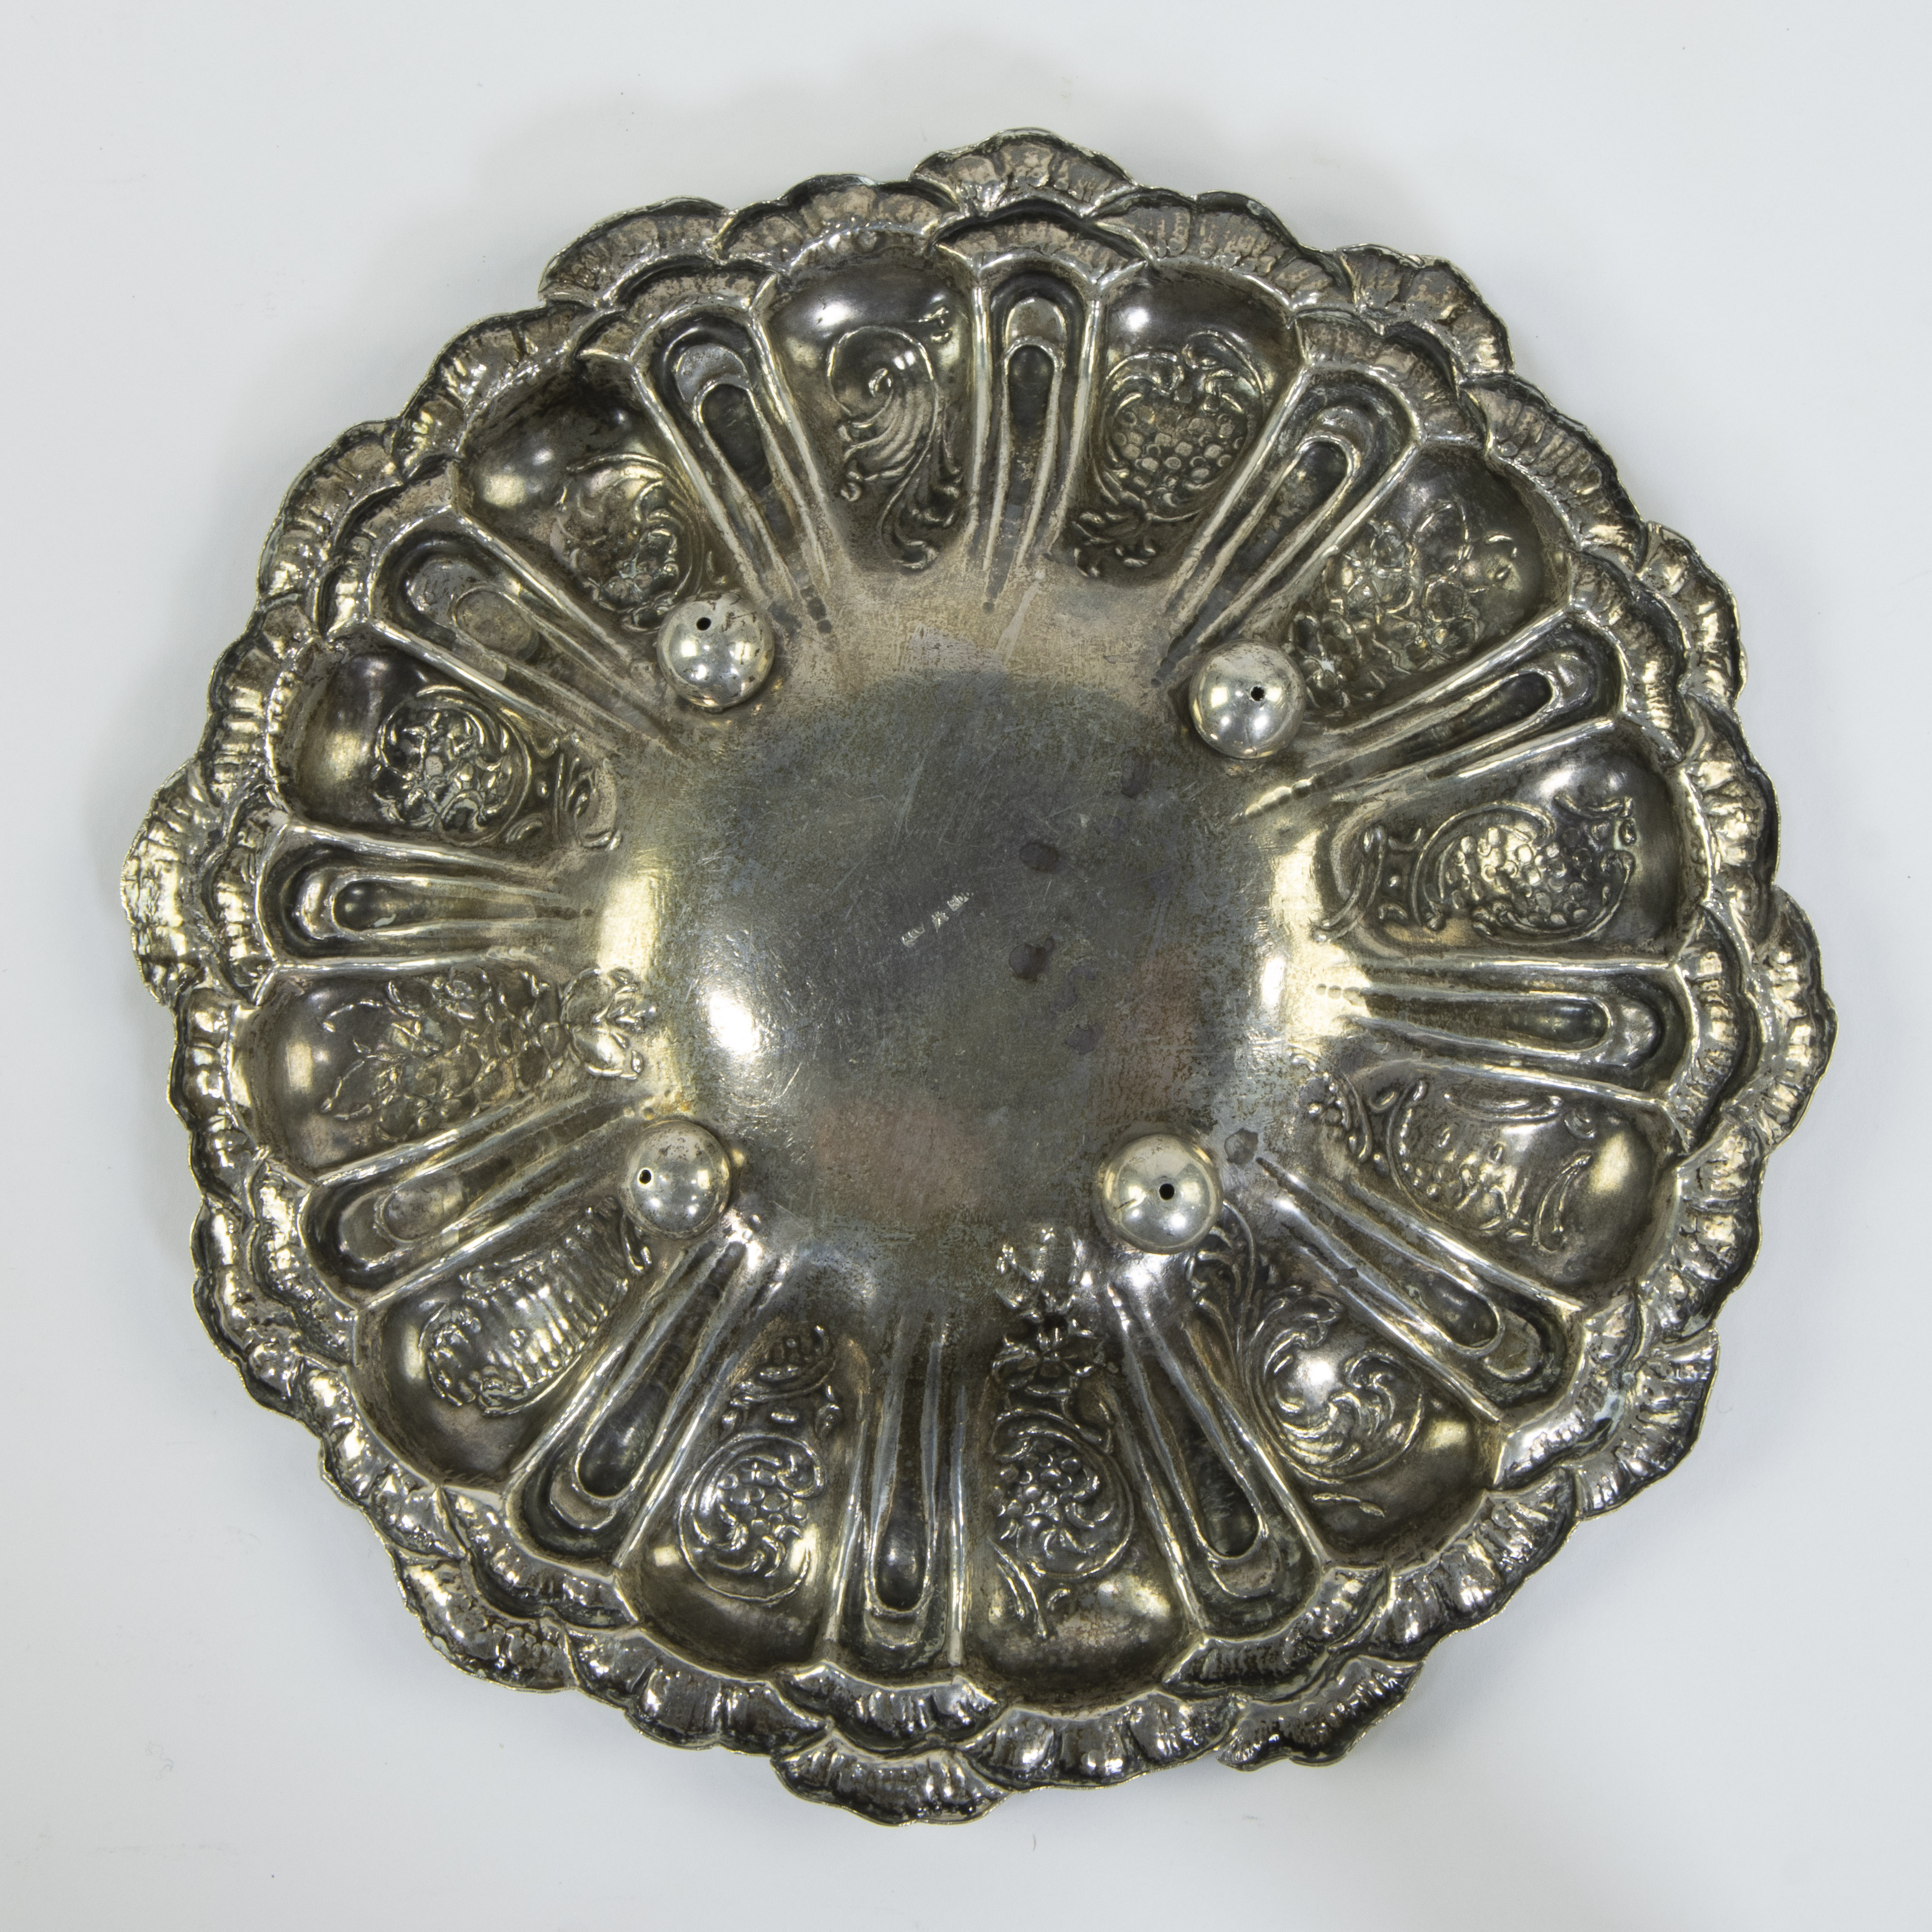 2 silver dishes, repoussé - Image 5 of 6